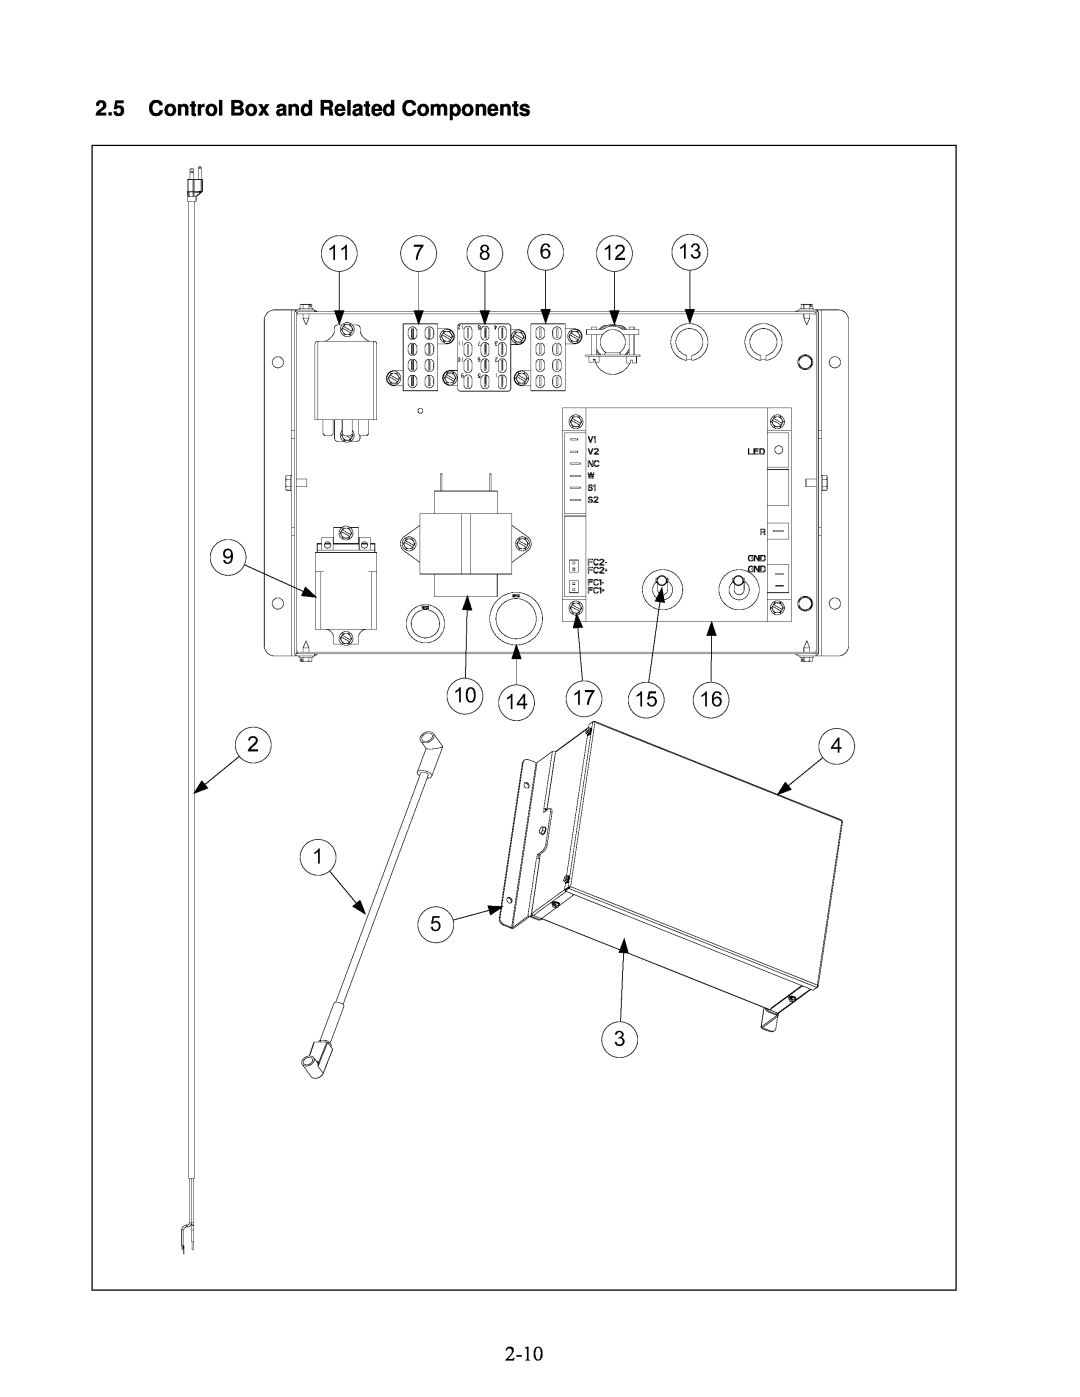 Frymaster 8196692 manual 2.5Control Box and Related Components 